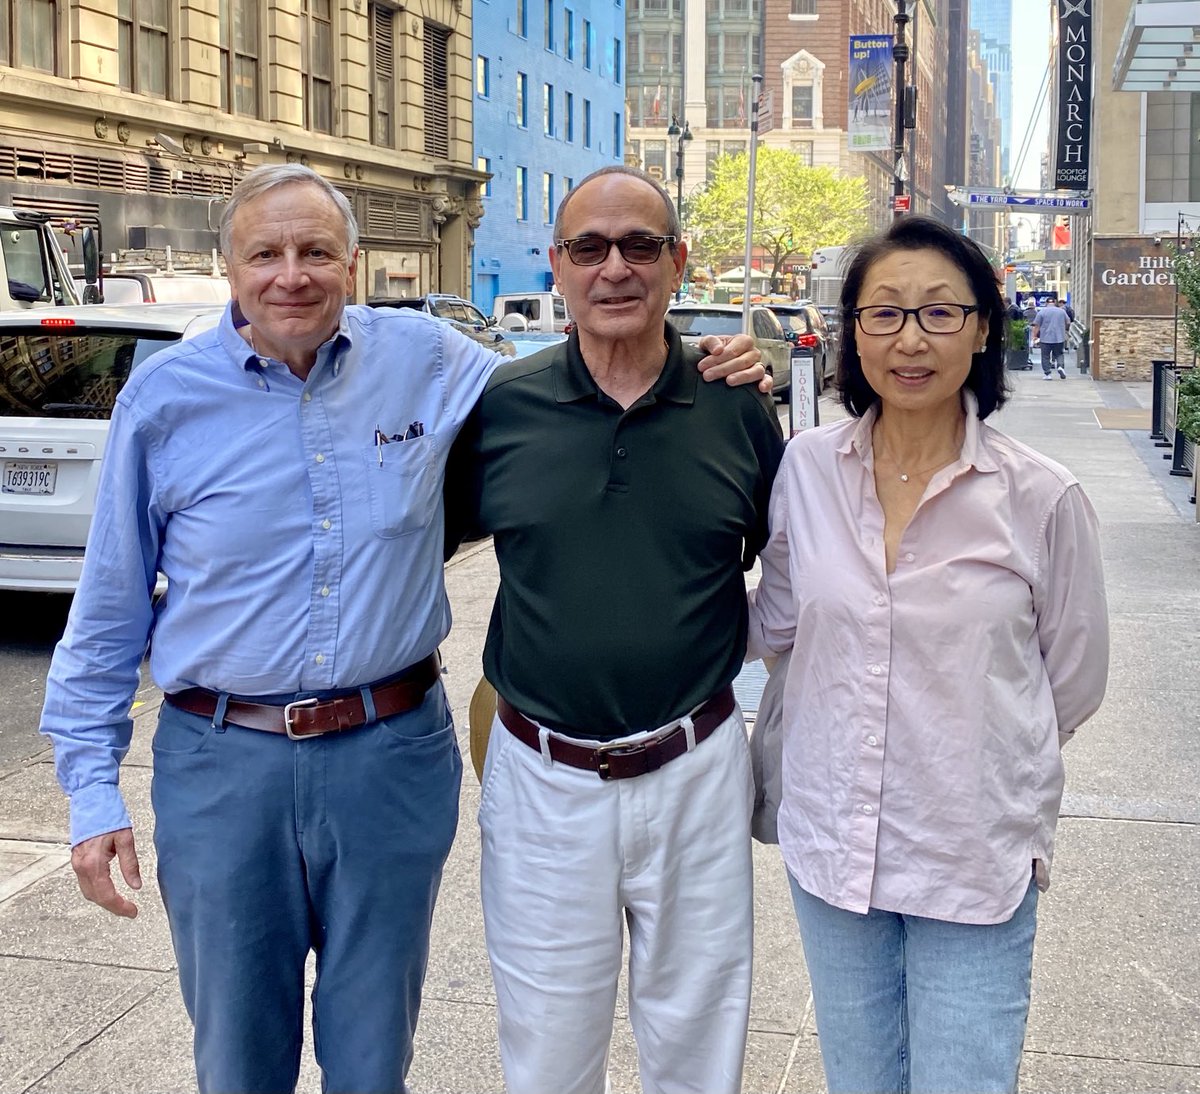 Pleased to meet with Linda and Rich Berthy of the Foreside Foundation in NYC today. The Foreside Foundation funds Freehold Borough students through the Tomazic Family Scholarship and has been an ongoing contributor to the work of the Freehold Borough Educational Foundation.